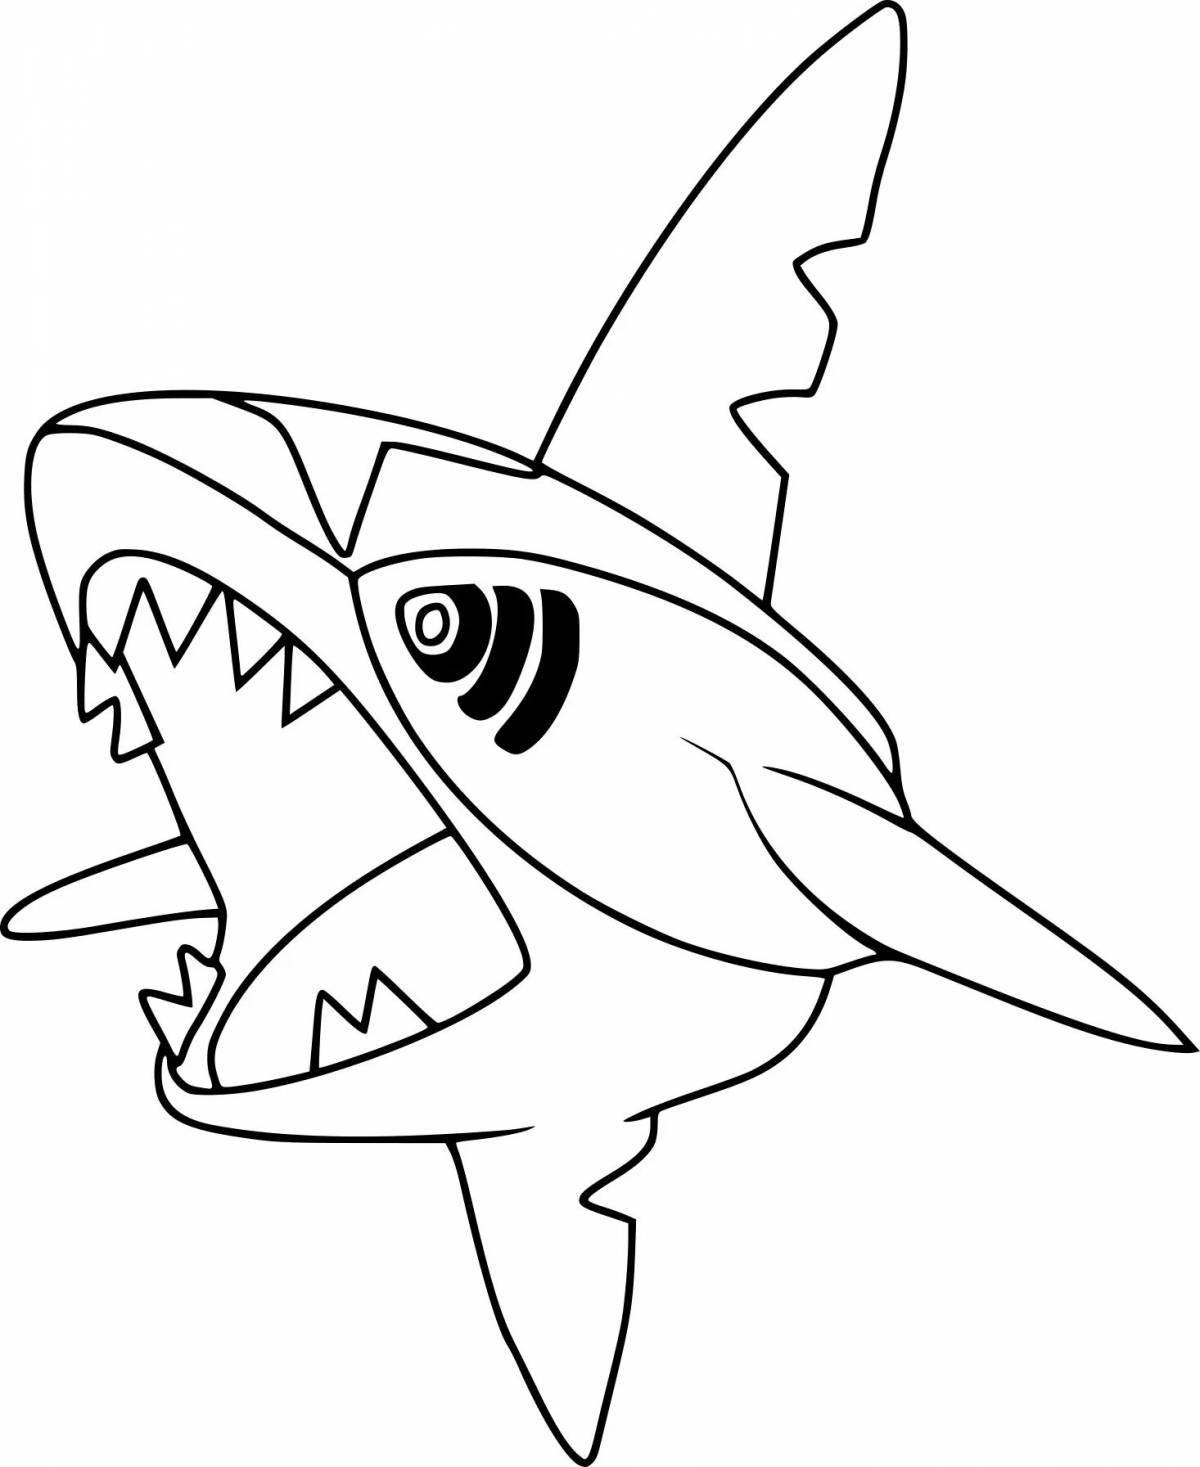 Impressive angry shark coloring book